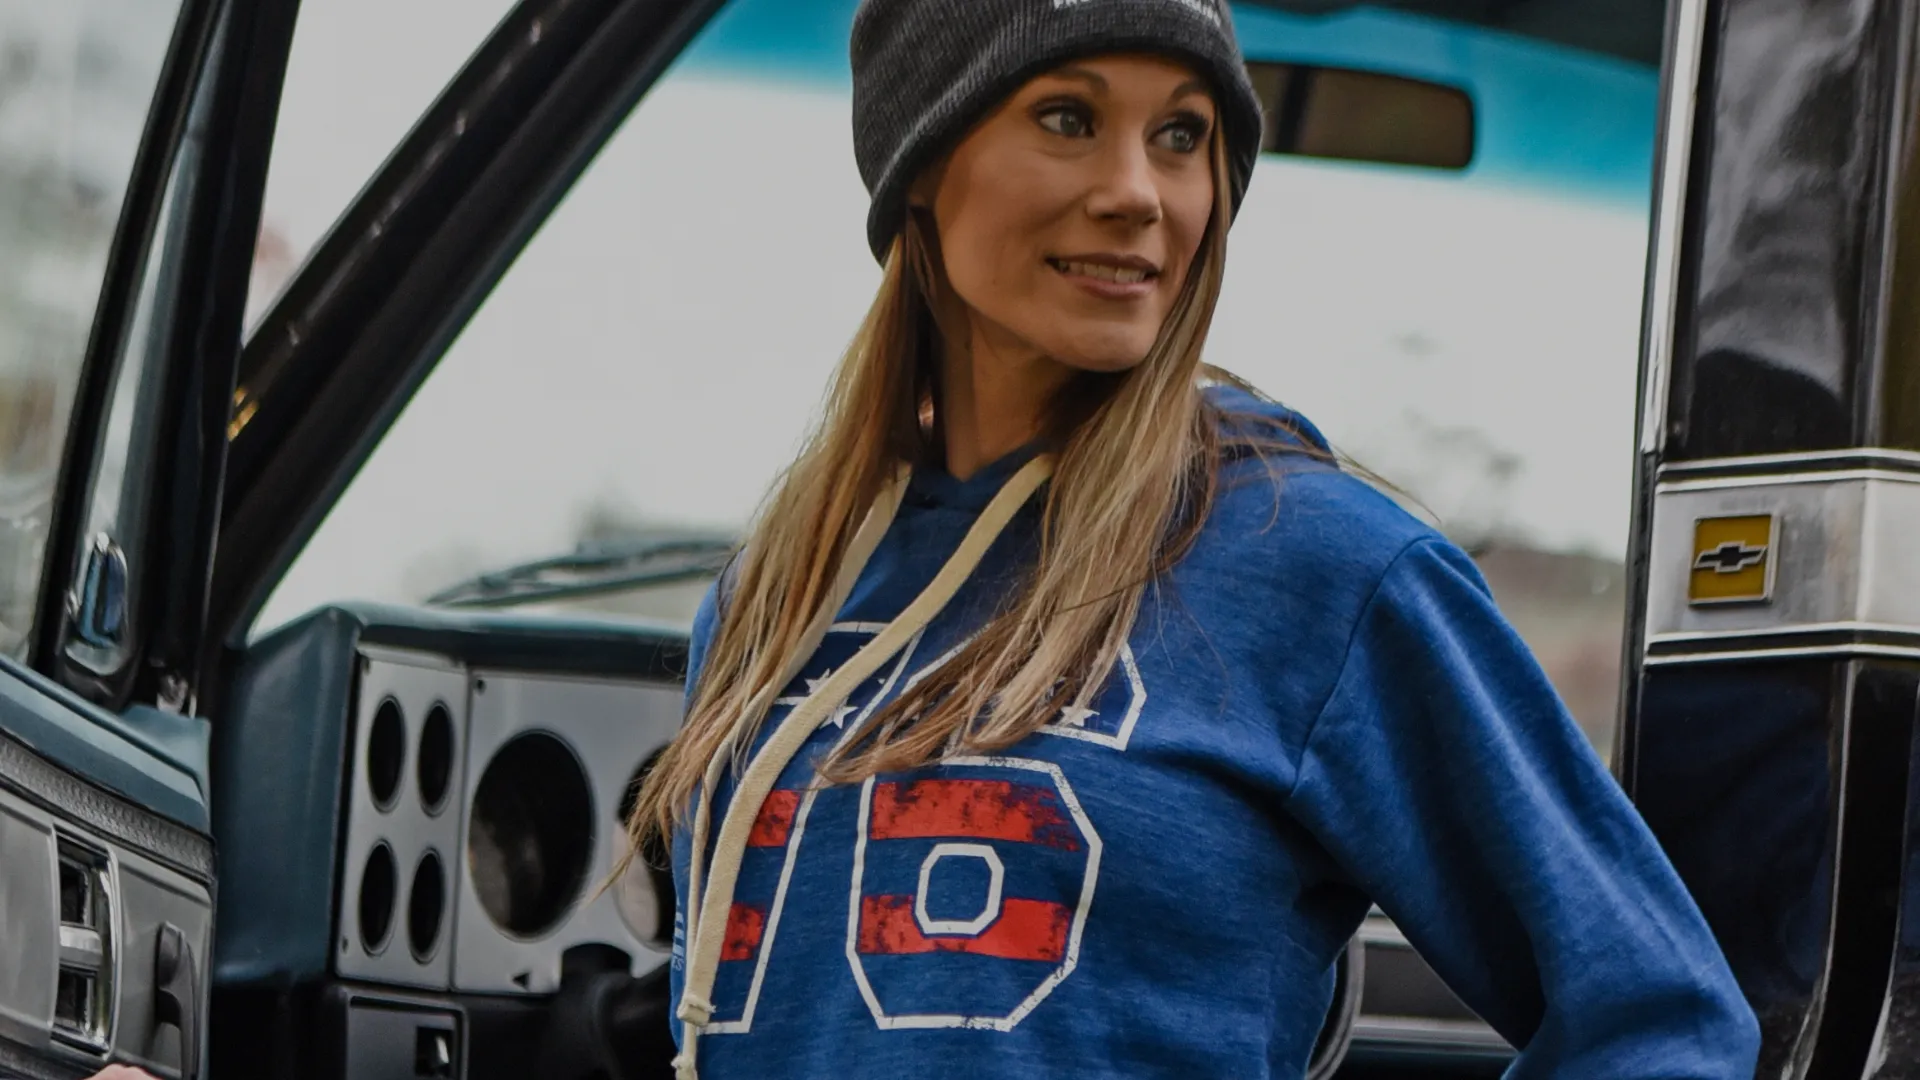 Woman wearing a hoodie exiting a truck